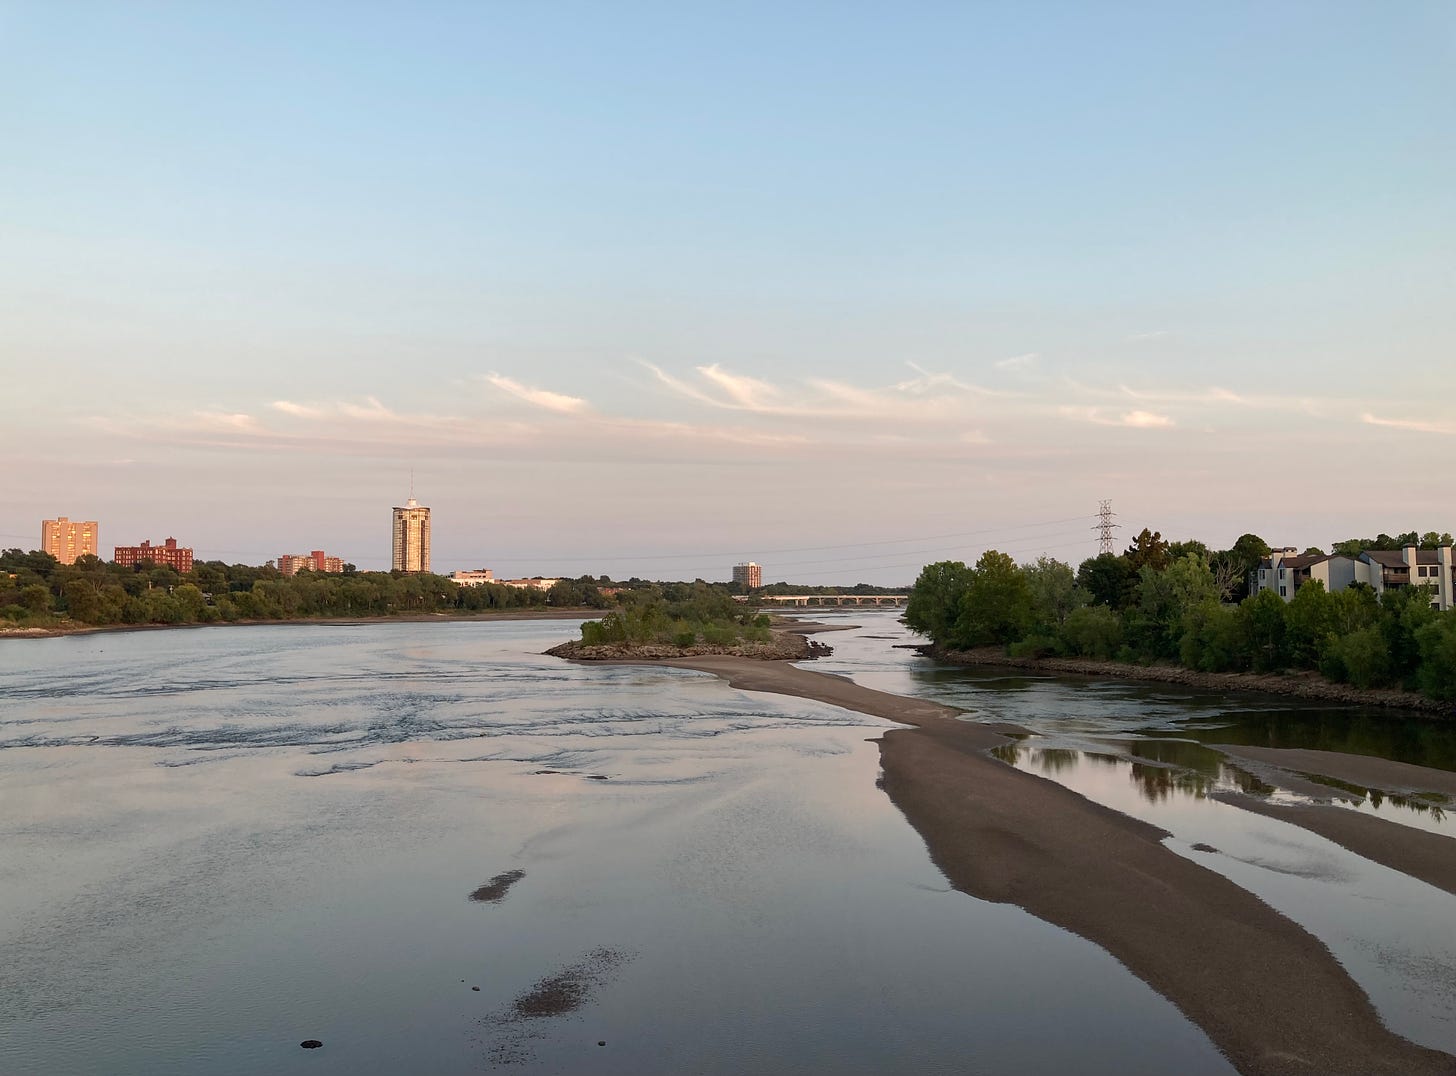 The photograph looks downstream over a wide, glassy Arkansas River, divided down one side by a bowing, terra cotta sandbar and vegetated island. The river reflects the fading pink and blue sky, streaked with delicate clouds just before dusk. In the distance, golden light illuminates the University Club Tower, Sophian Plaza and a few other buildings peeking out above the treetops along the east bank.  